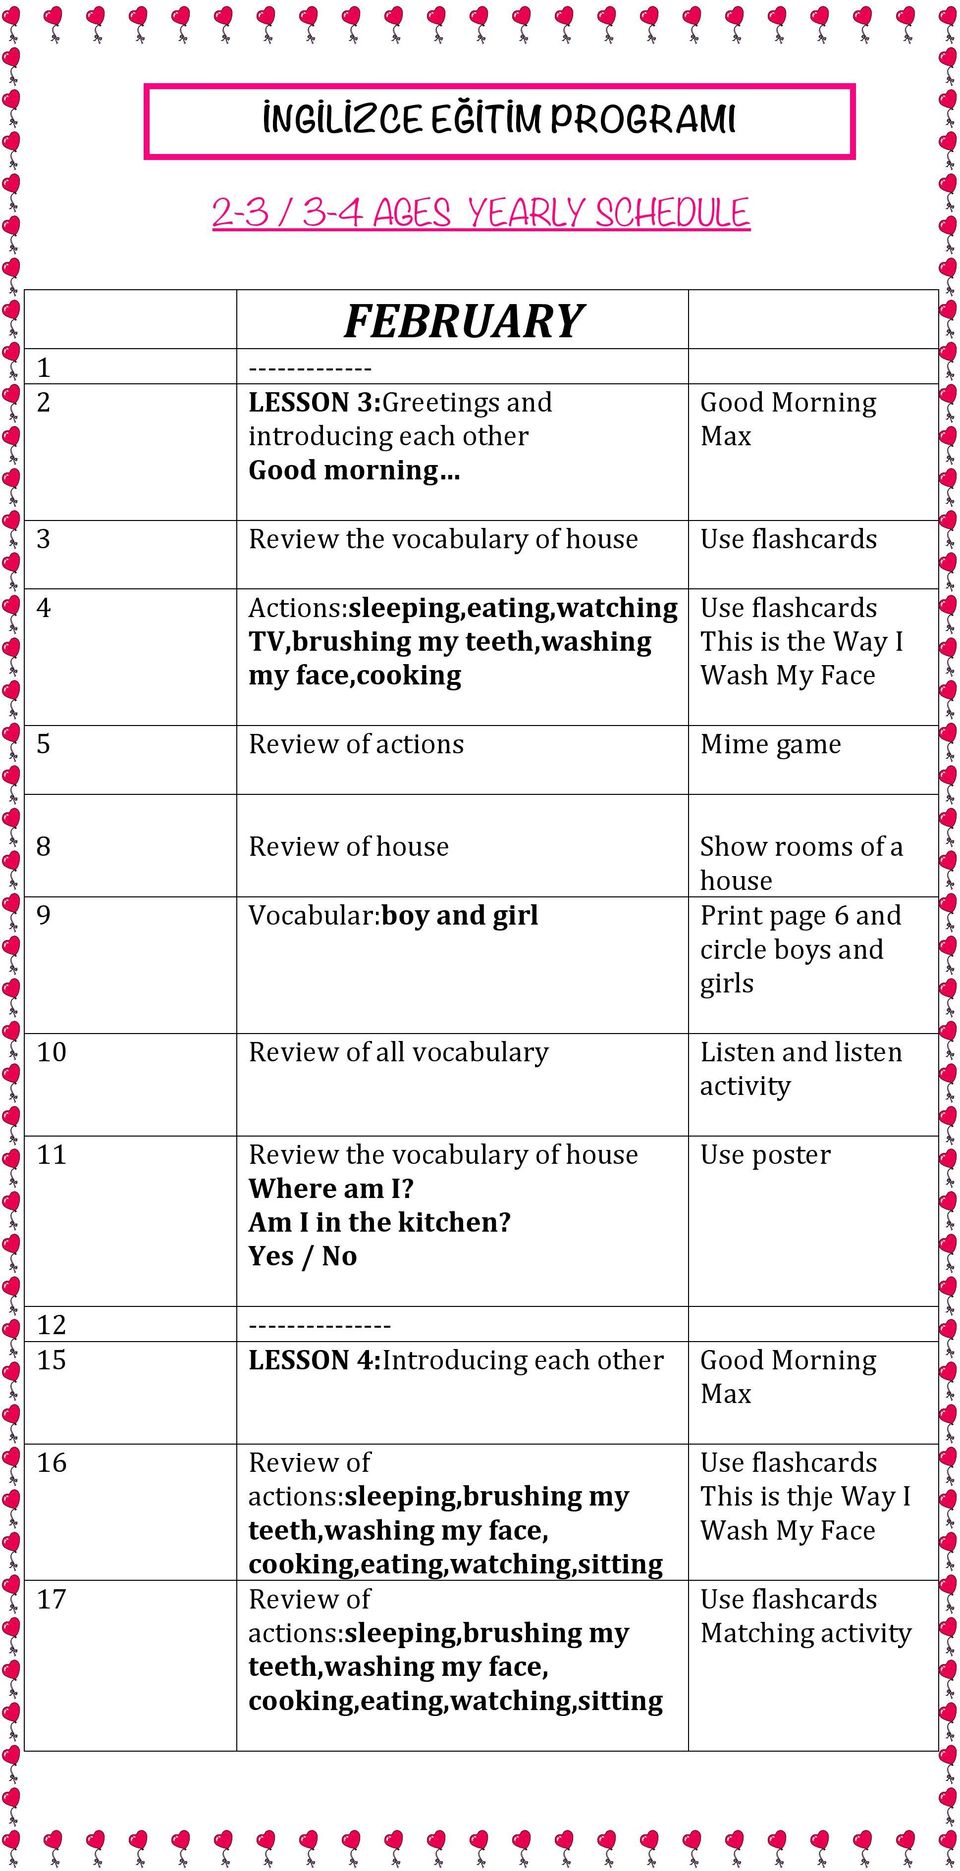 a house 9 Vocabular:boy and girl Print page 6 and circle boys and girls 10 Review of all vocabulary Listen and listen activity 11 Review the vocabulary of house Where am I? Am I in the kitchen?